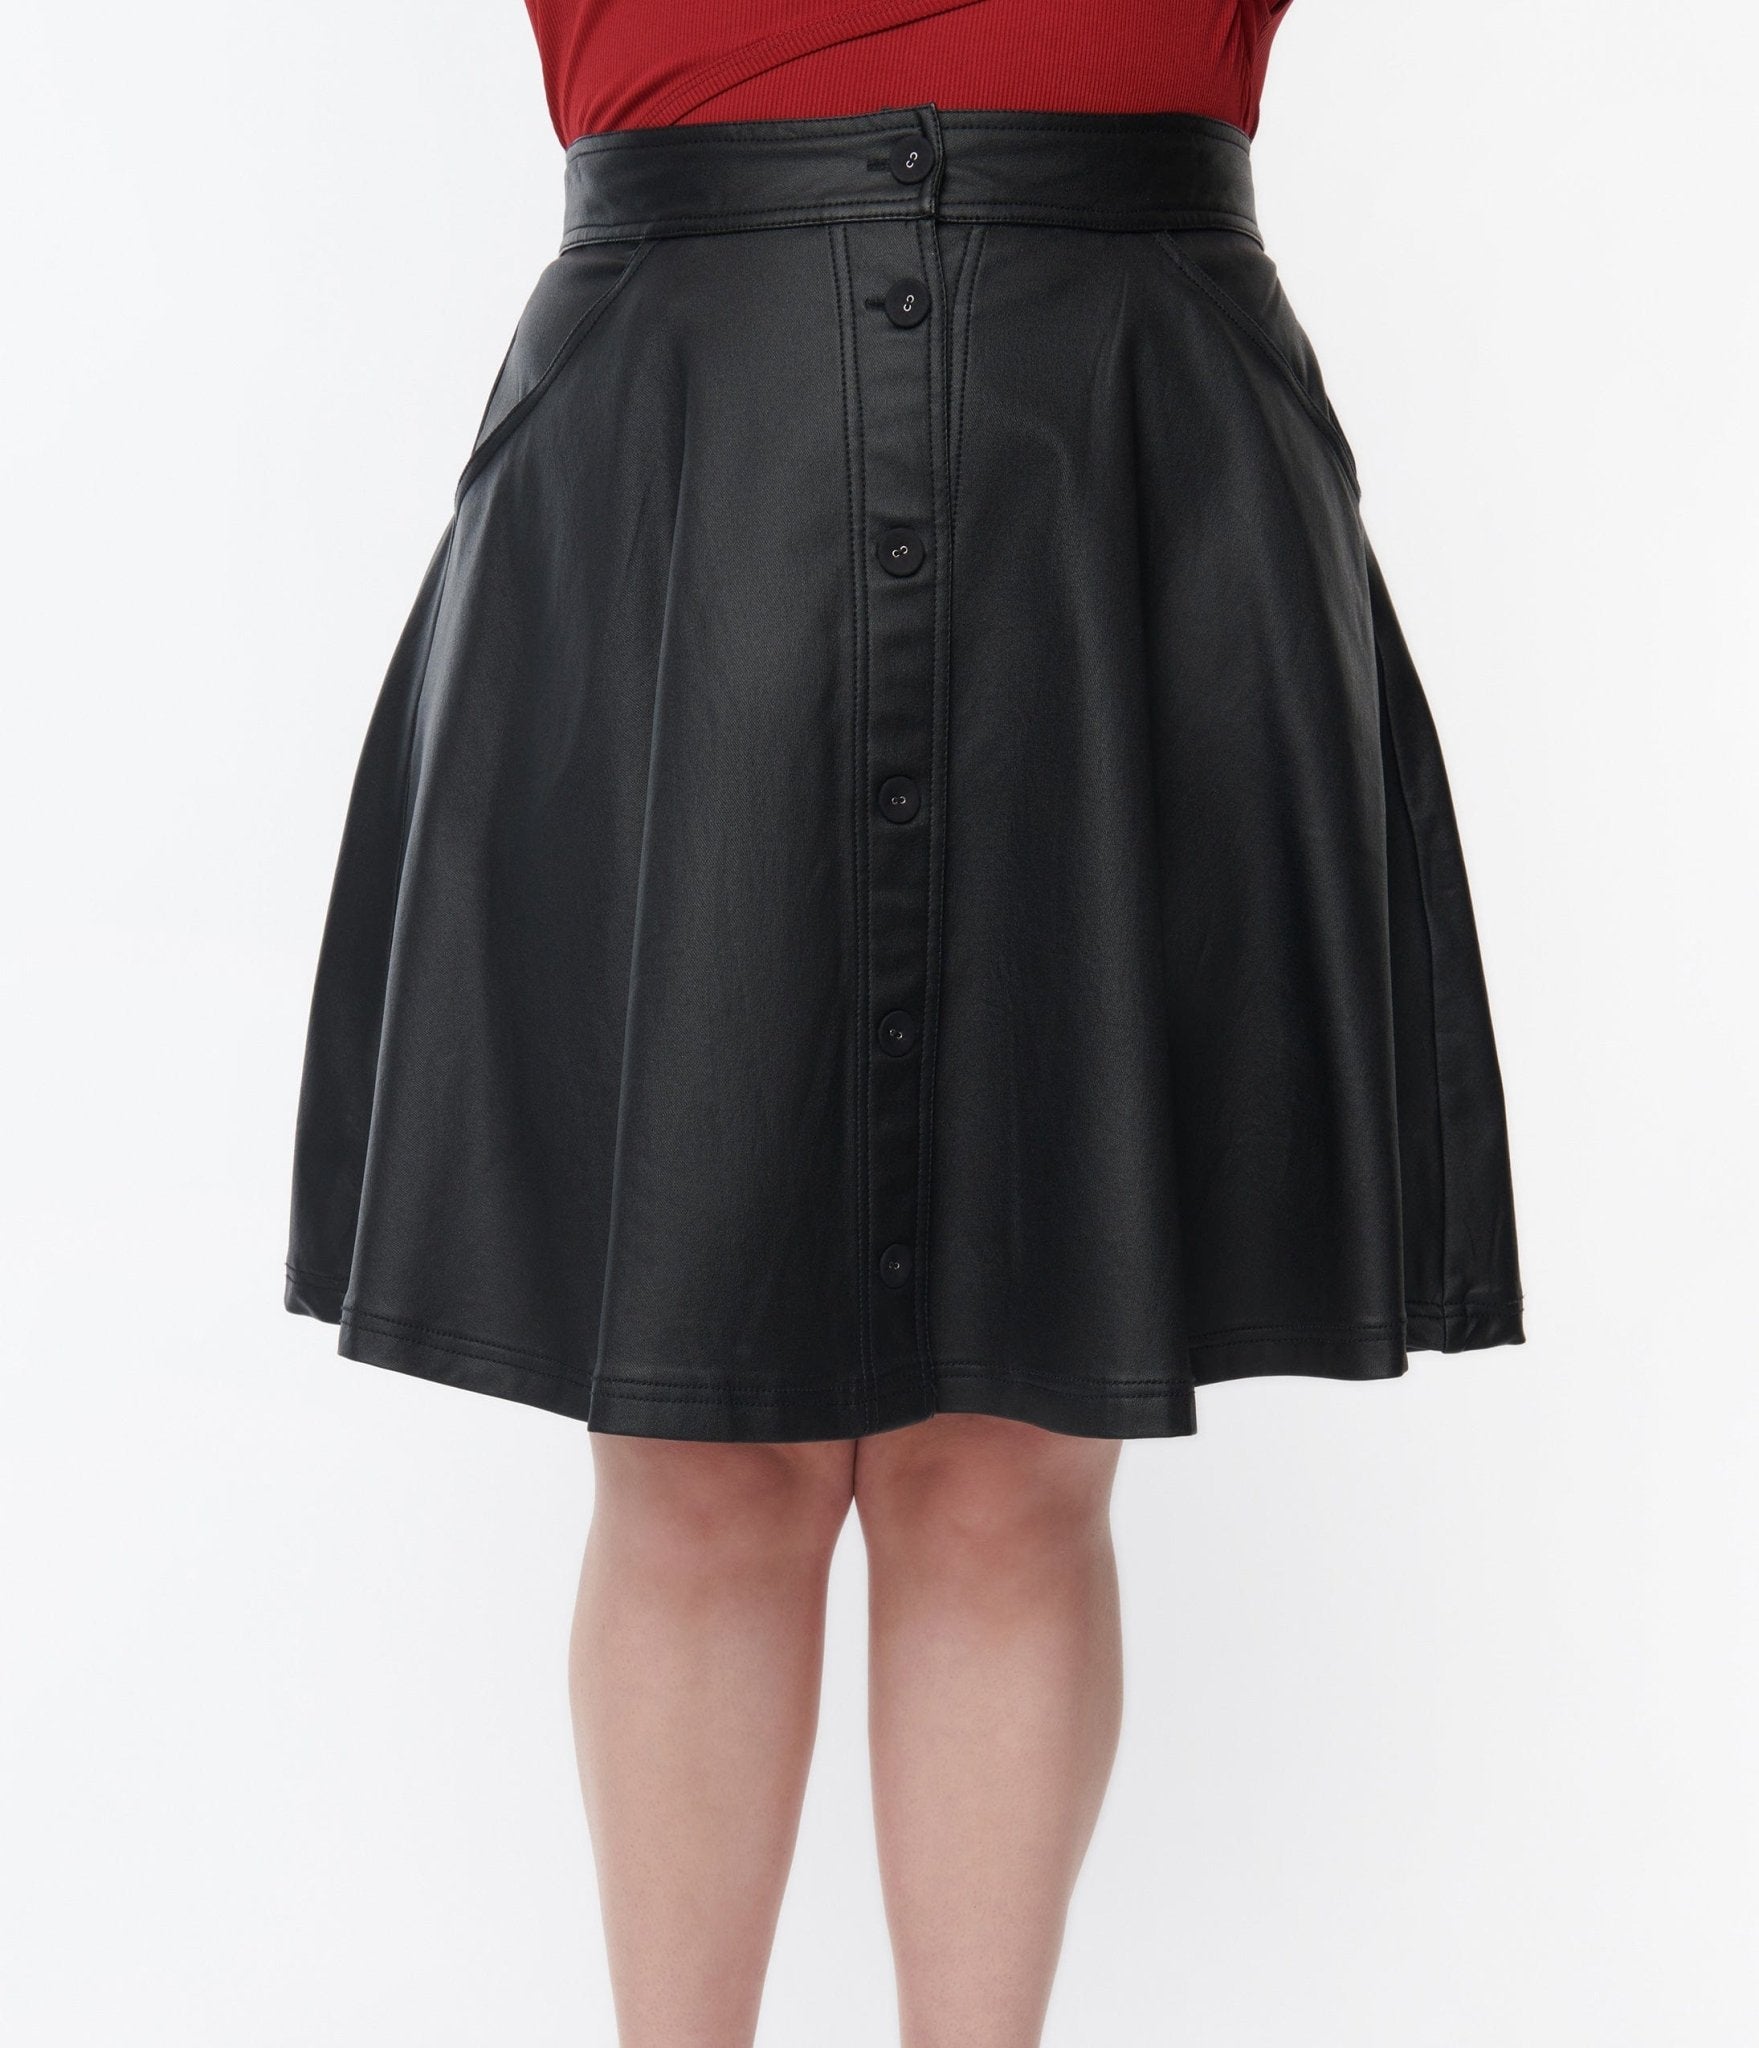  SPANX Plus Size Faux Leather Skater Skirt Very Black 3X -  Regular : Clothing, Shoes & Jewelry